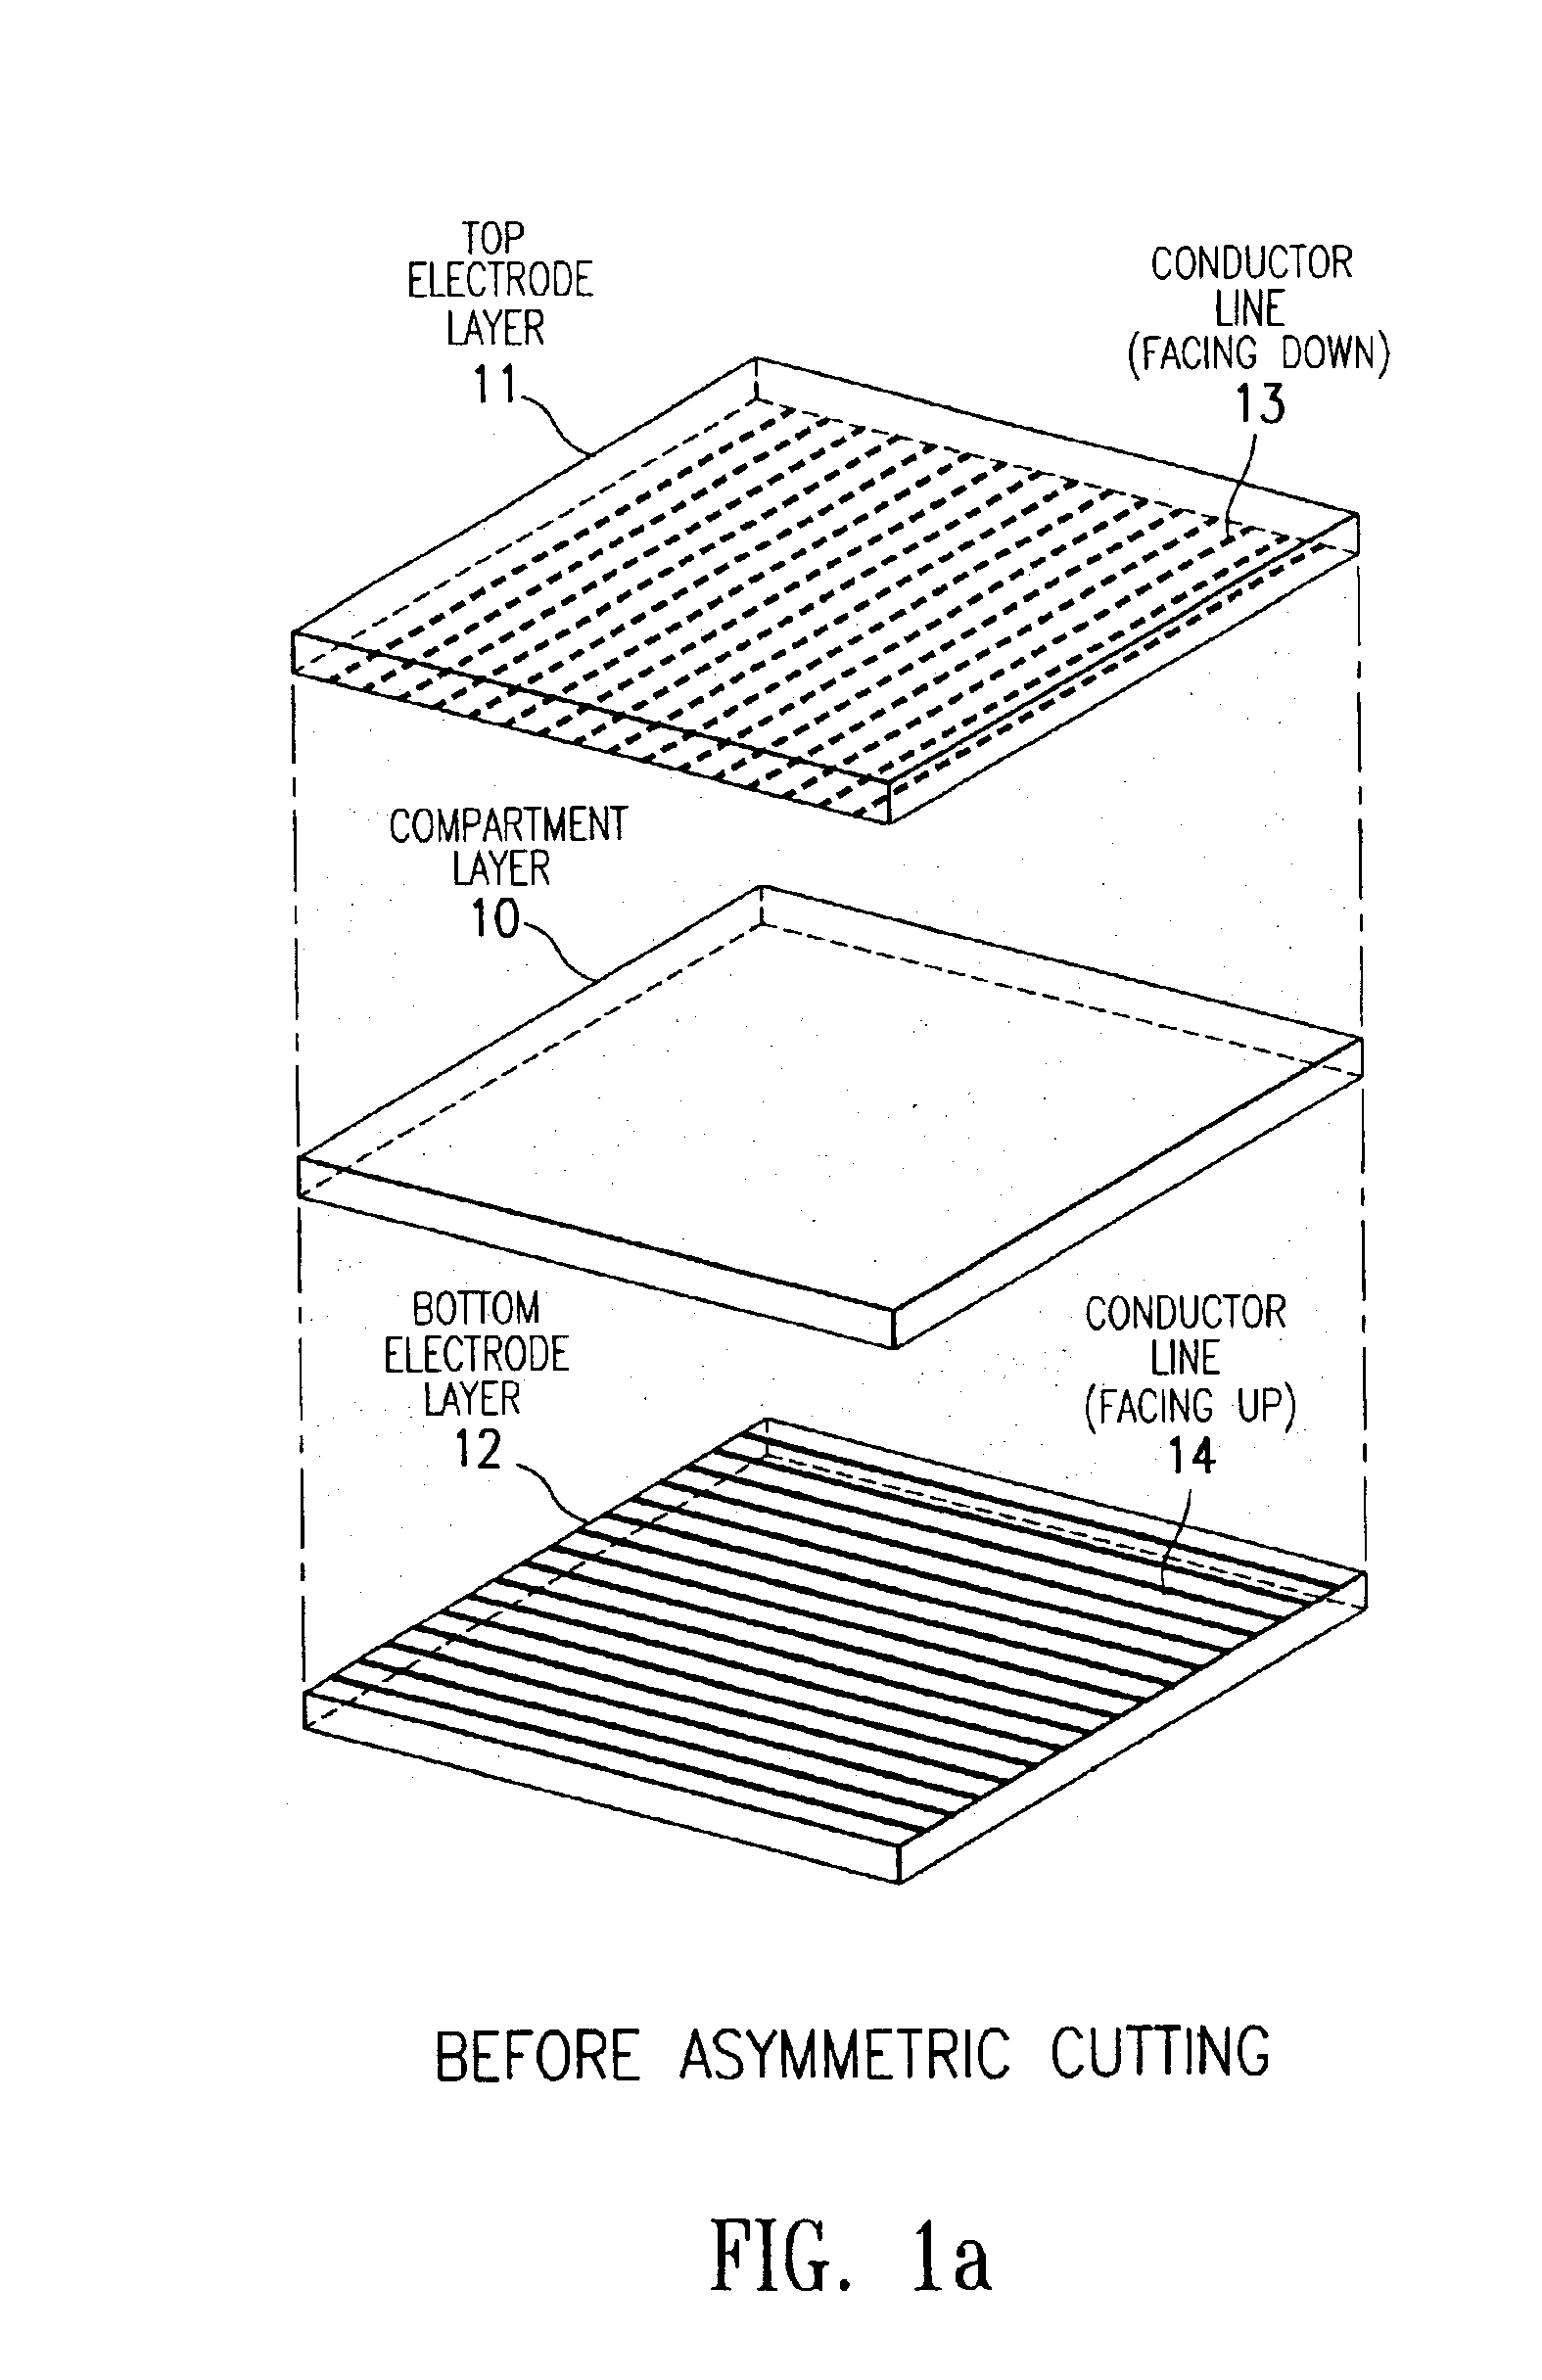 Compositions and processes for format flexible, roll-to-roll manufacturing of electrophoretic displays